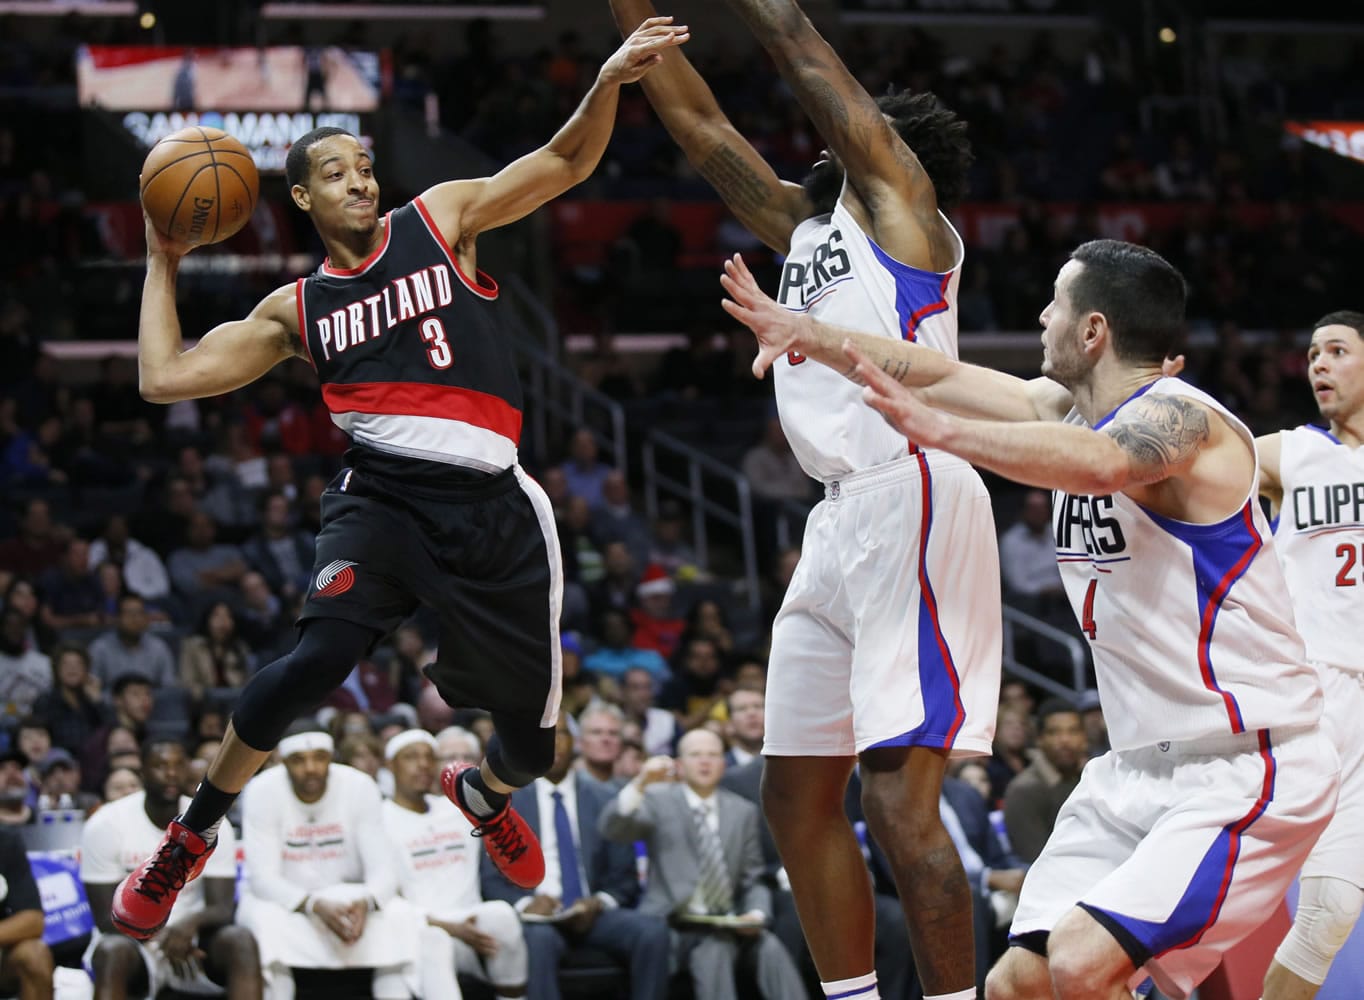 Portland Trail Blazers&#039; C.J. McCollum, left, looks to pass as Los Angeles Clippers&#039; DeAndre Jordan, center, and Clippers&#039; J.J. Redick, right, defends during the second half of an NBA basketball game, Monday, Nov. 30, 2015, in Los Angeles. The Clippers on 102-87.